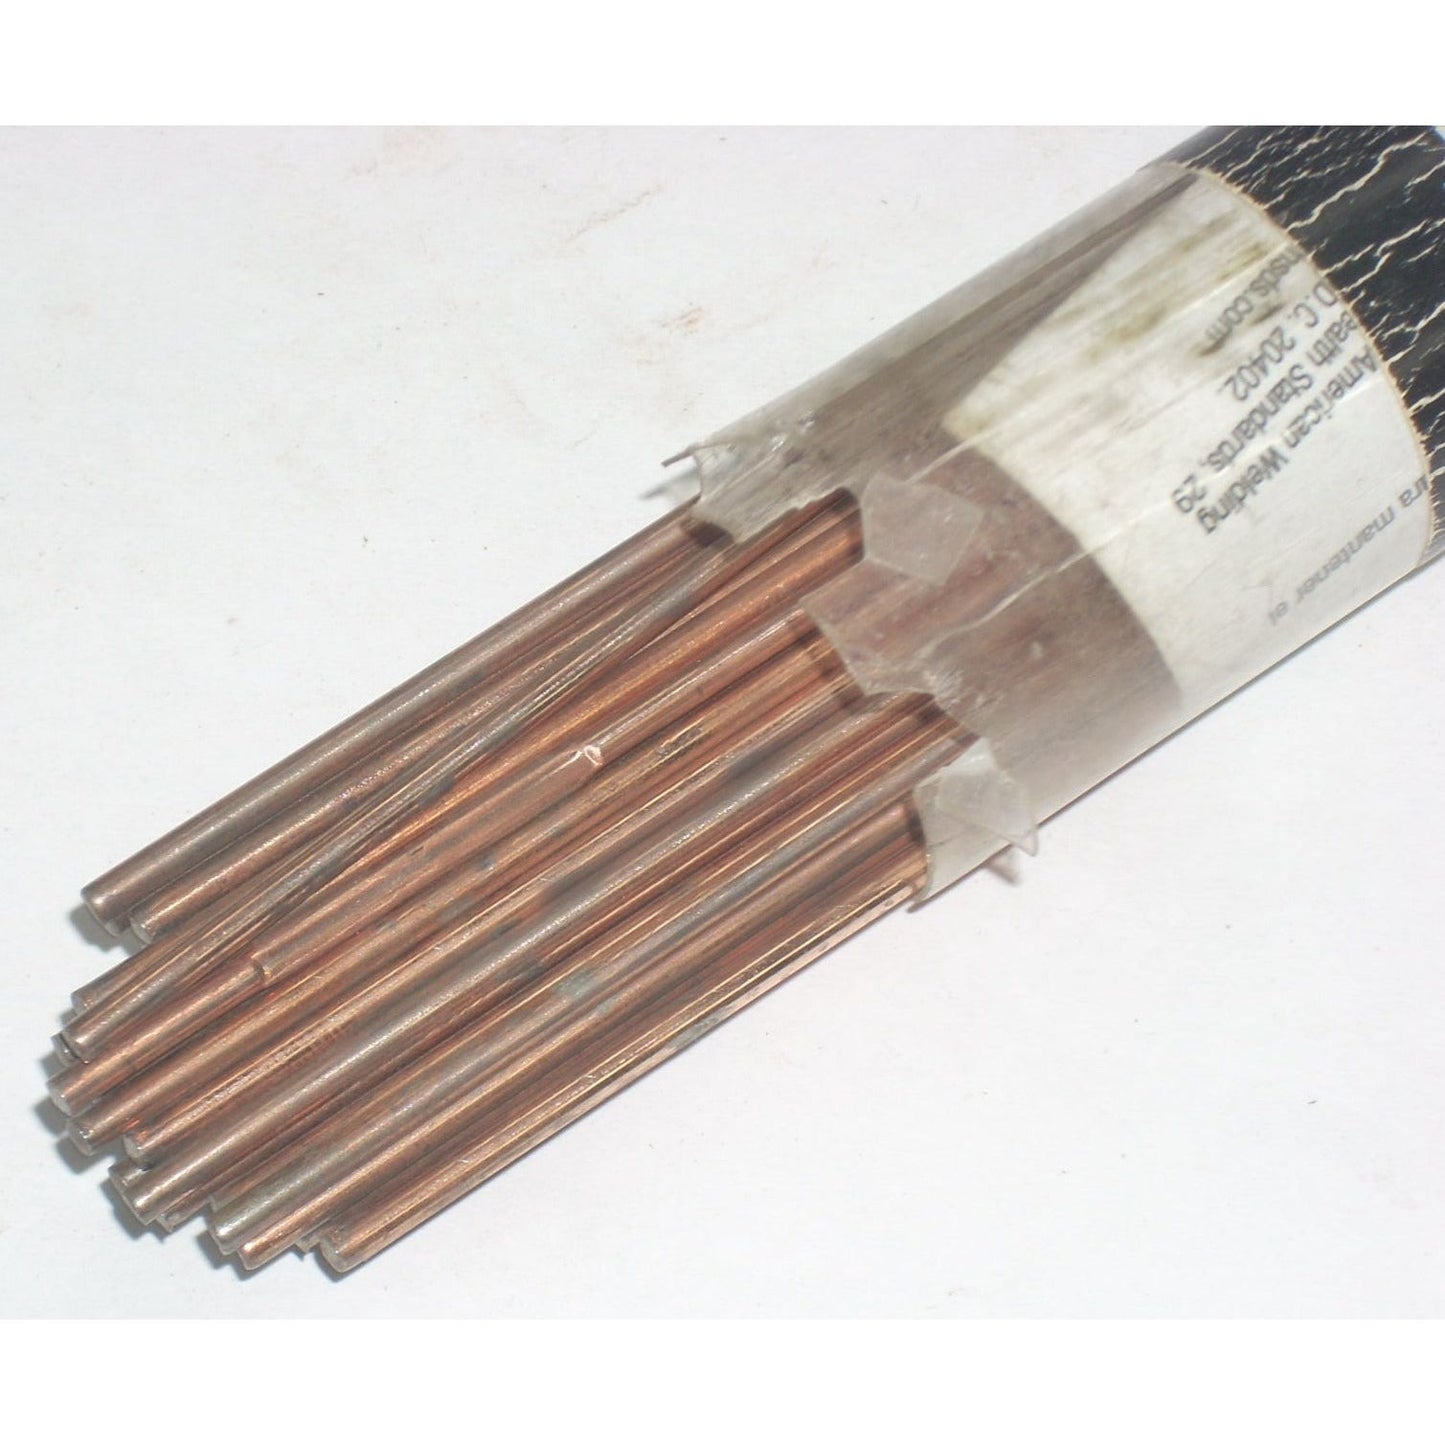 Forney R45 Copper Coated Brazing Rods 3/32 x 36 - 3.6 lb